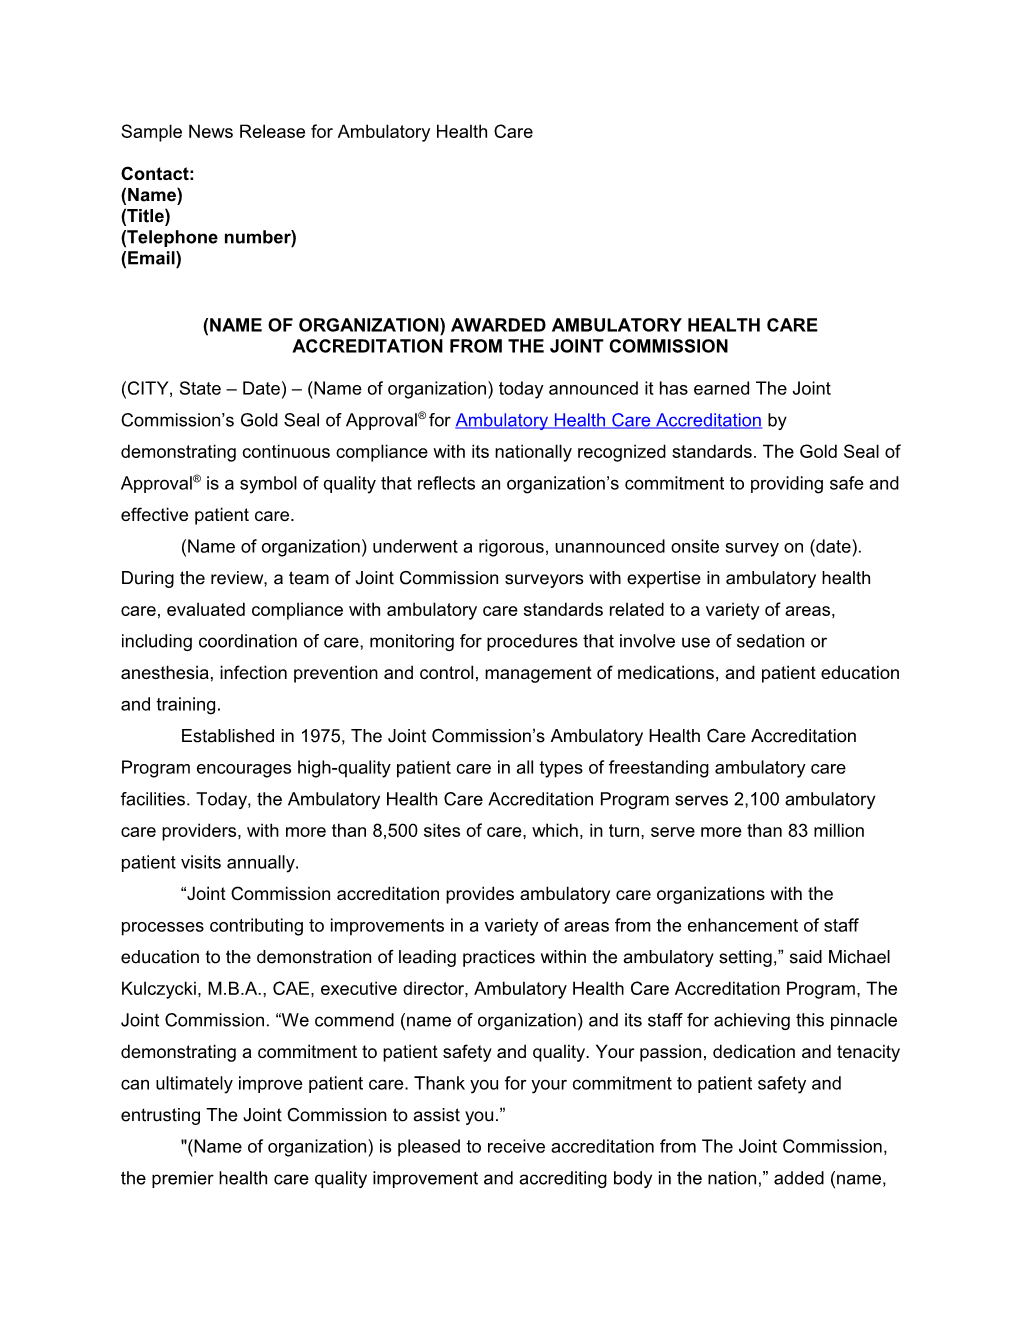 Sample News Release for Ambulatory Health Care